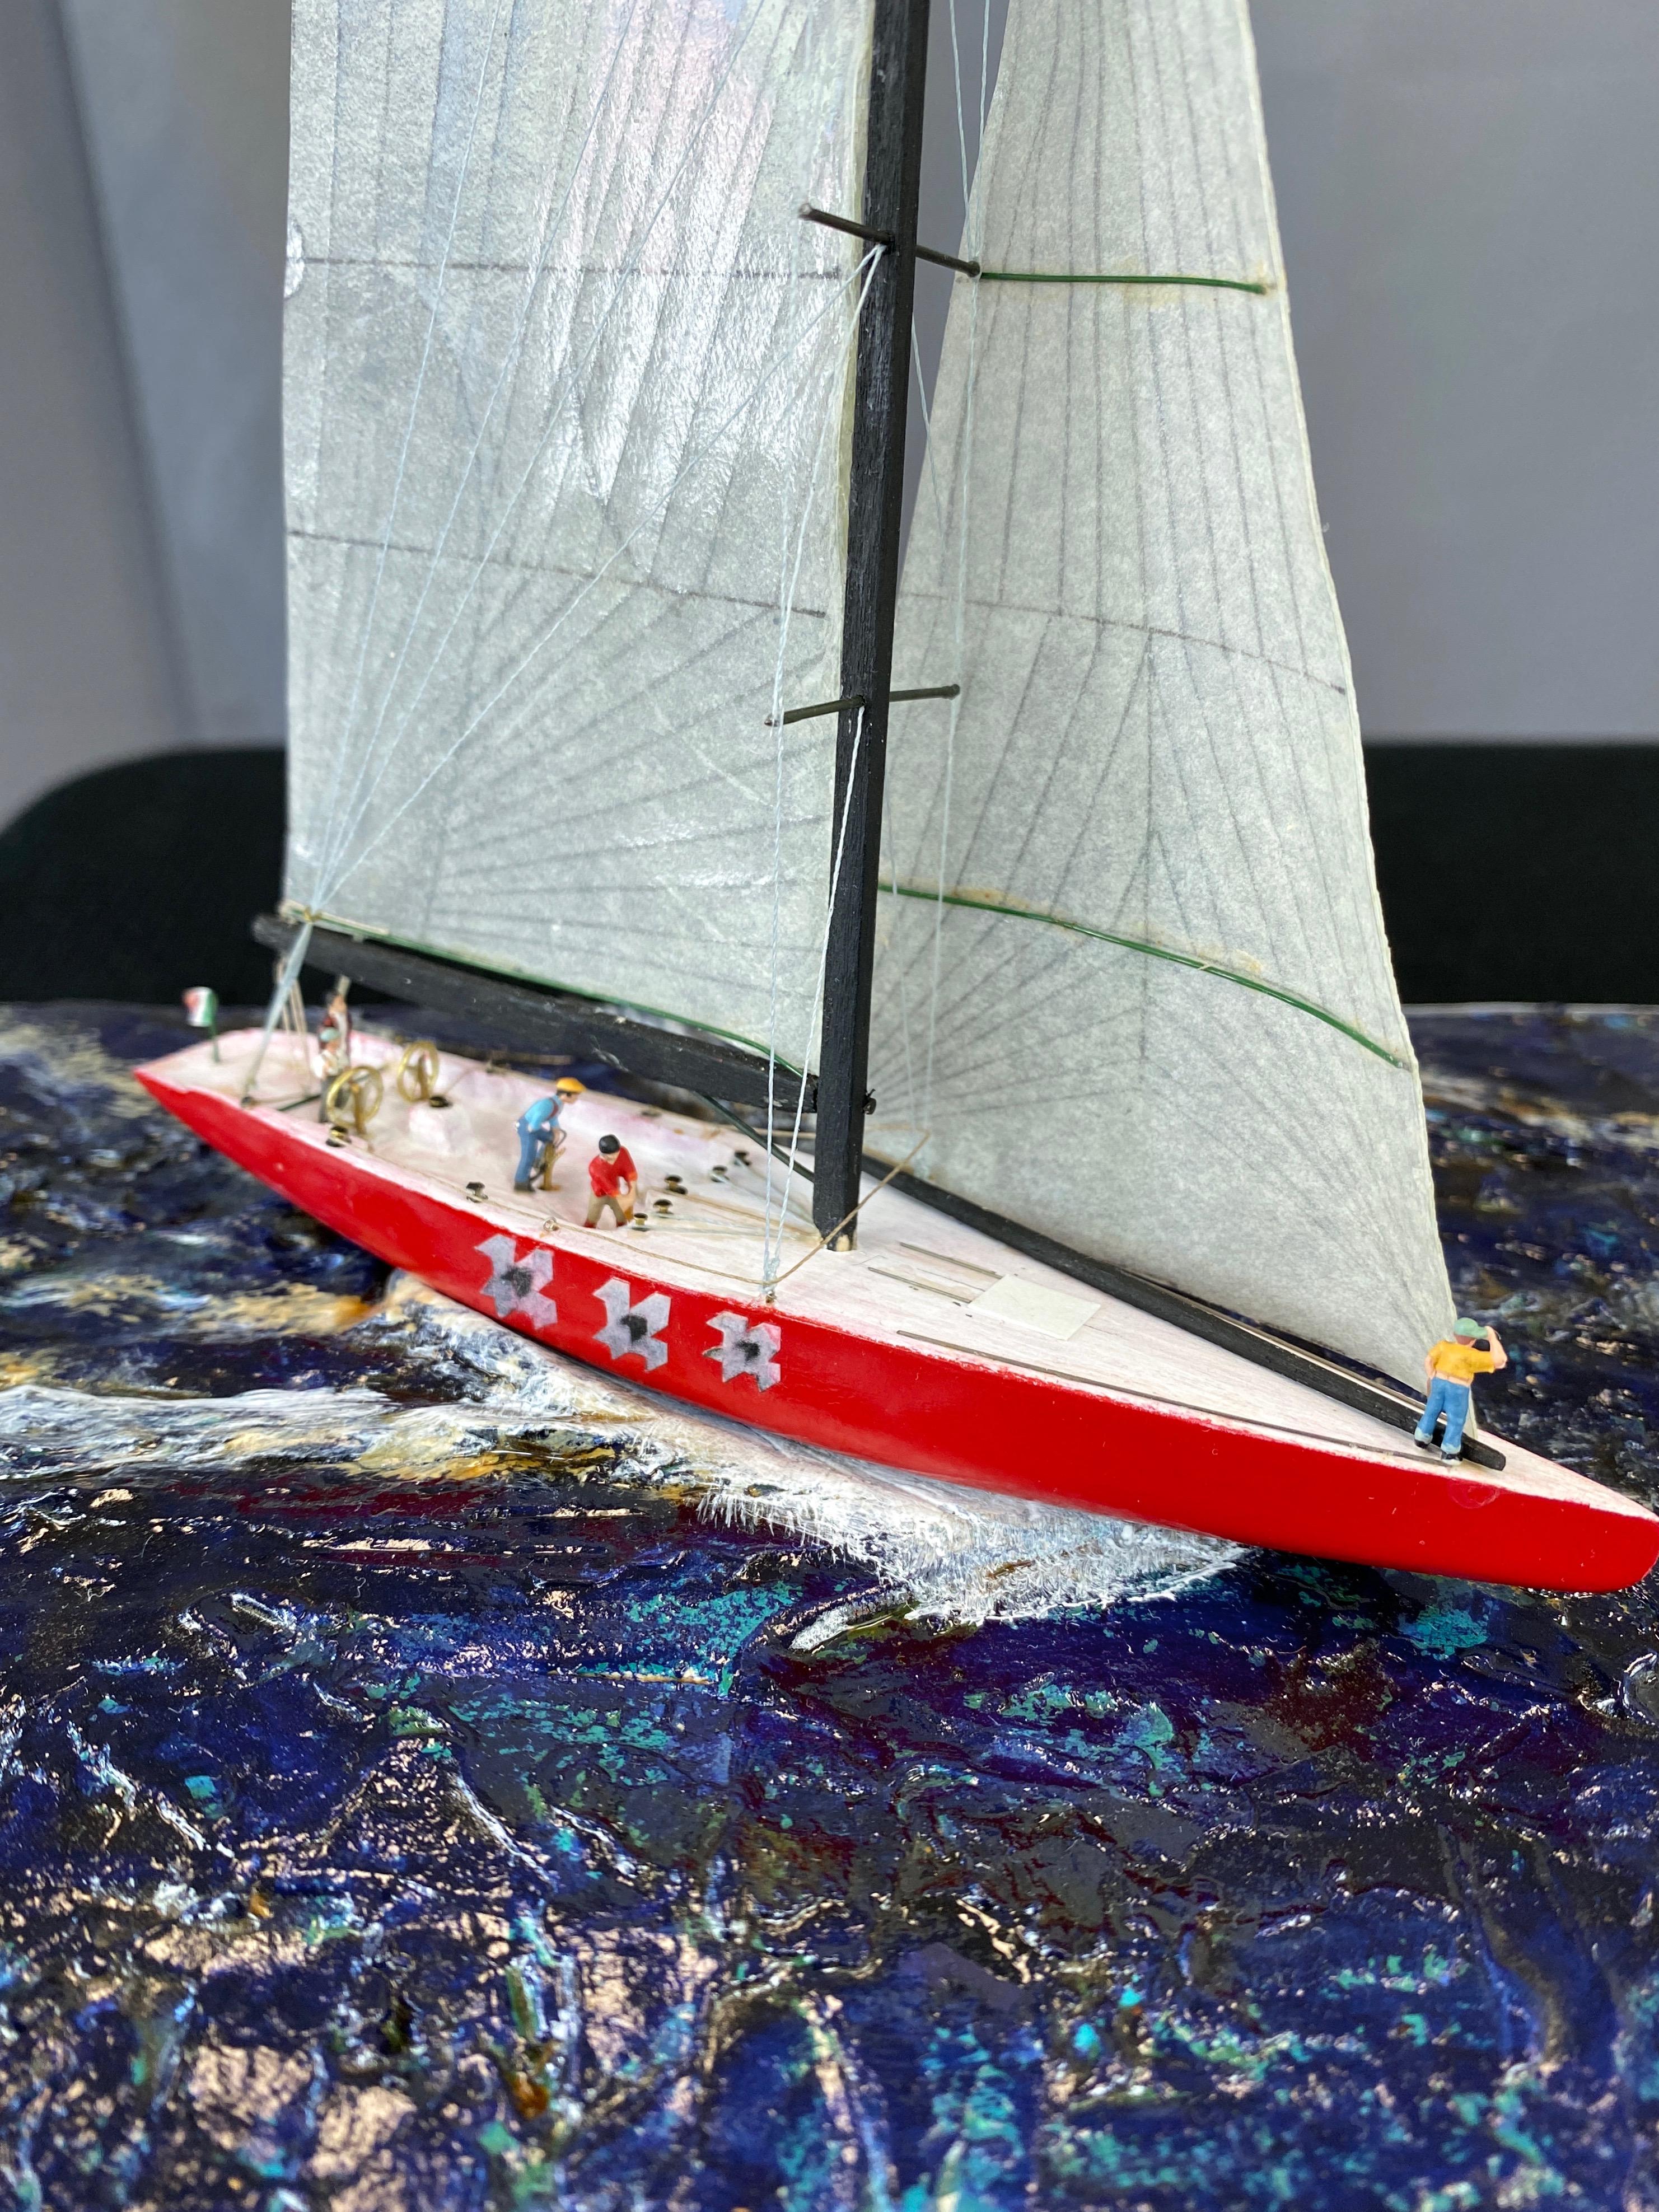 R. Royer 1992 28th America’s Cup Hand-Built Cased Diorama, 2009 5